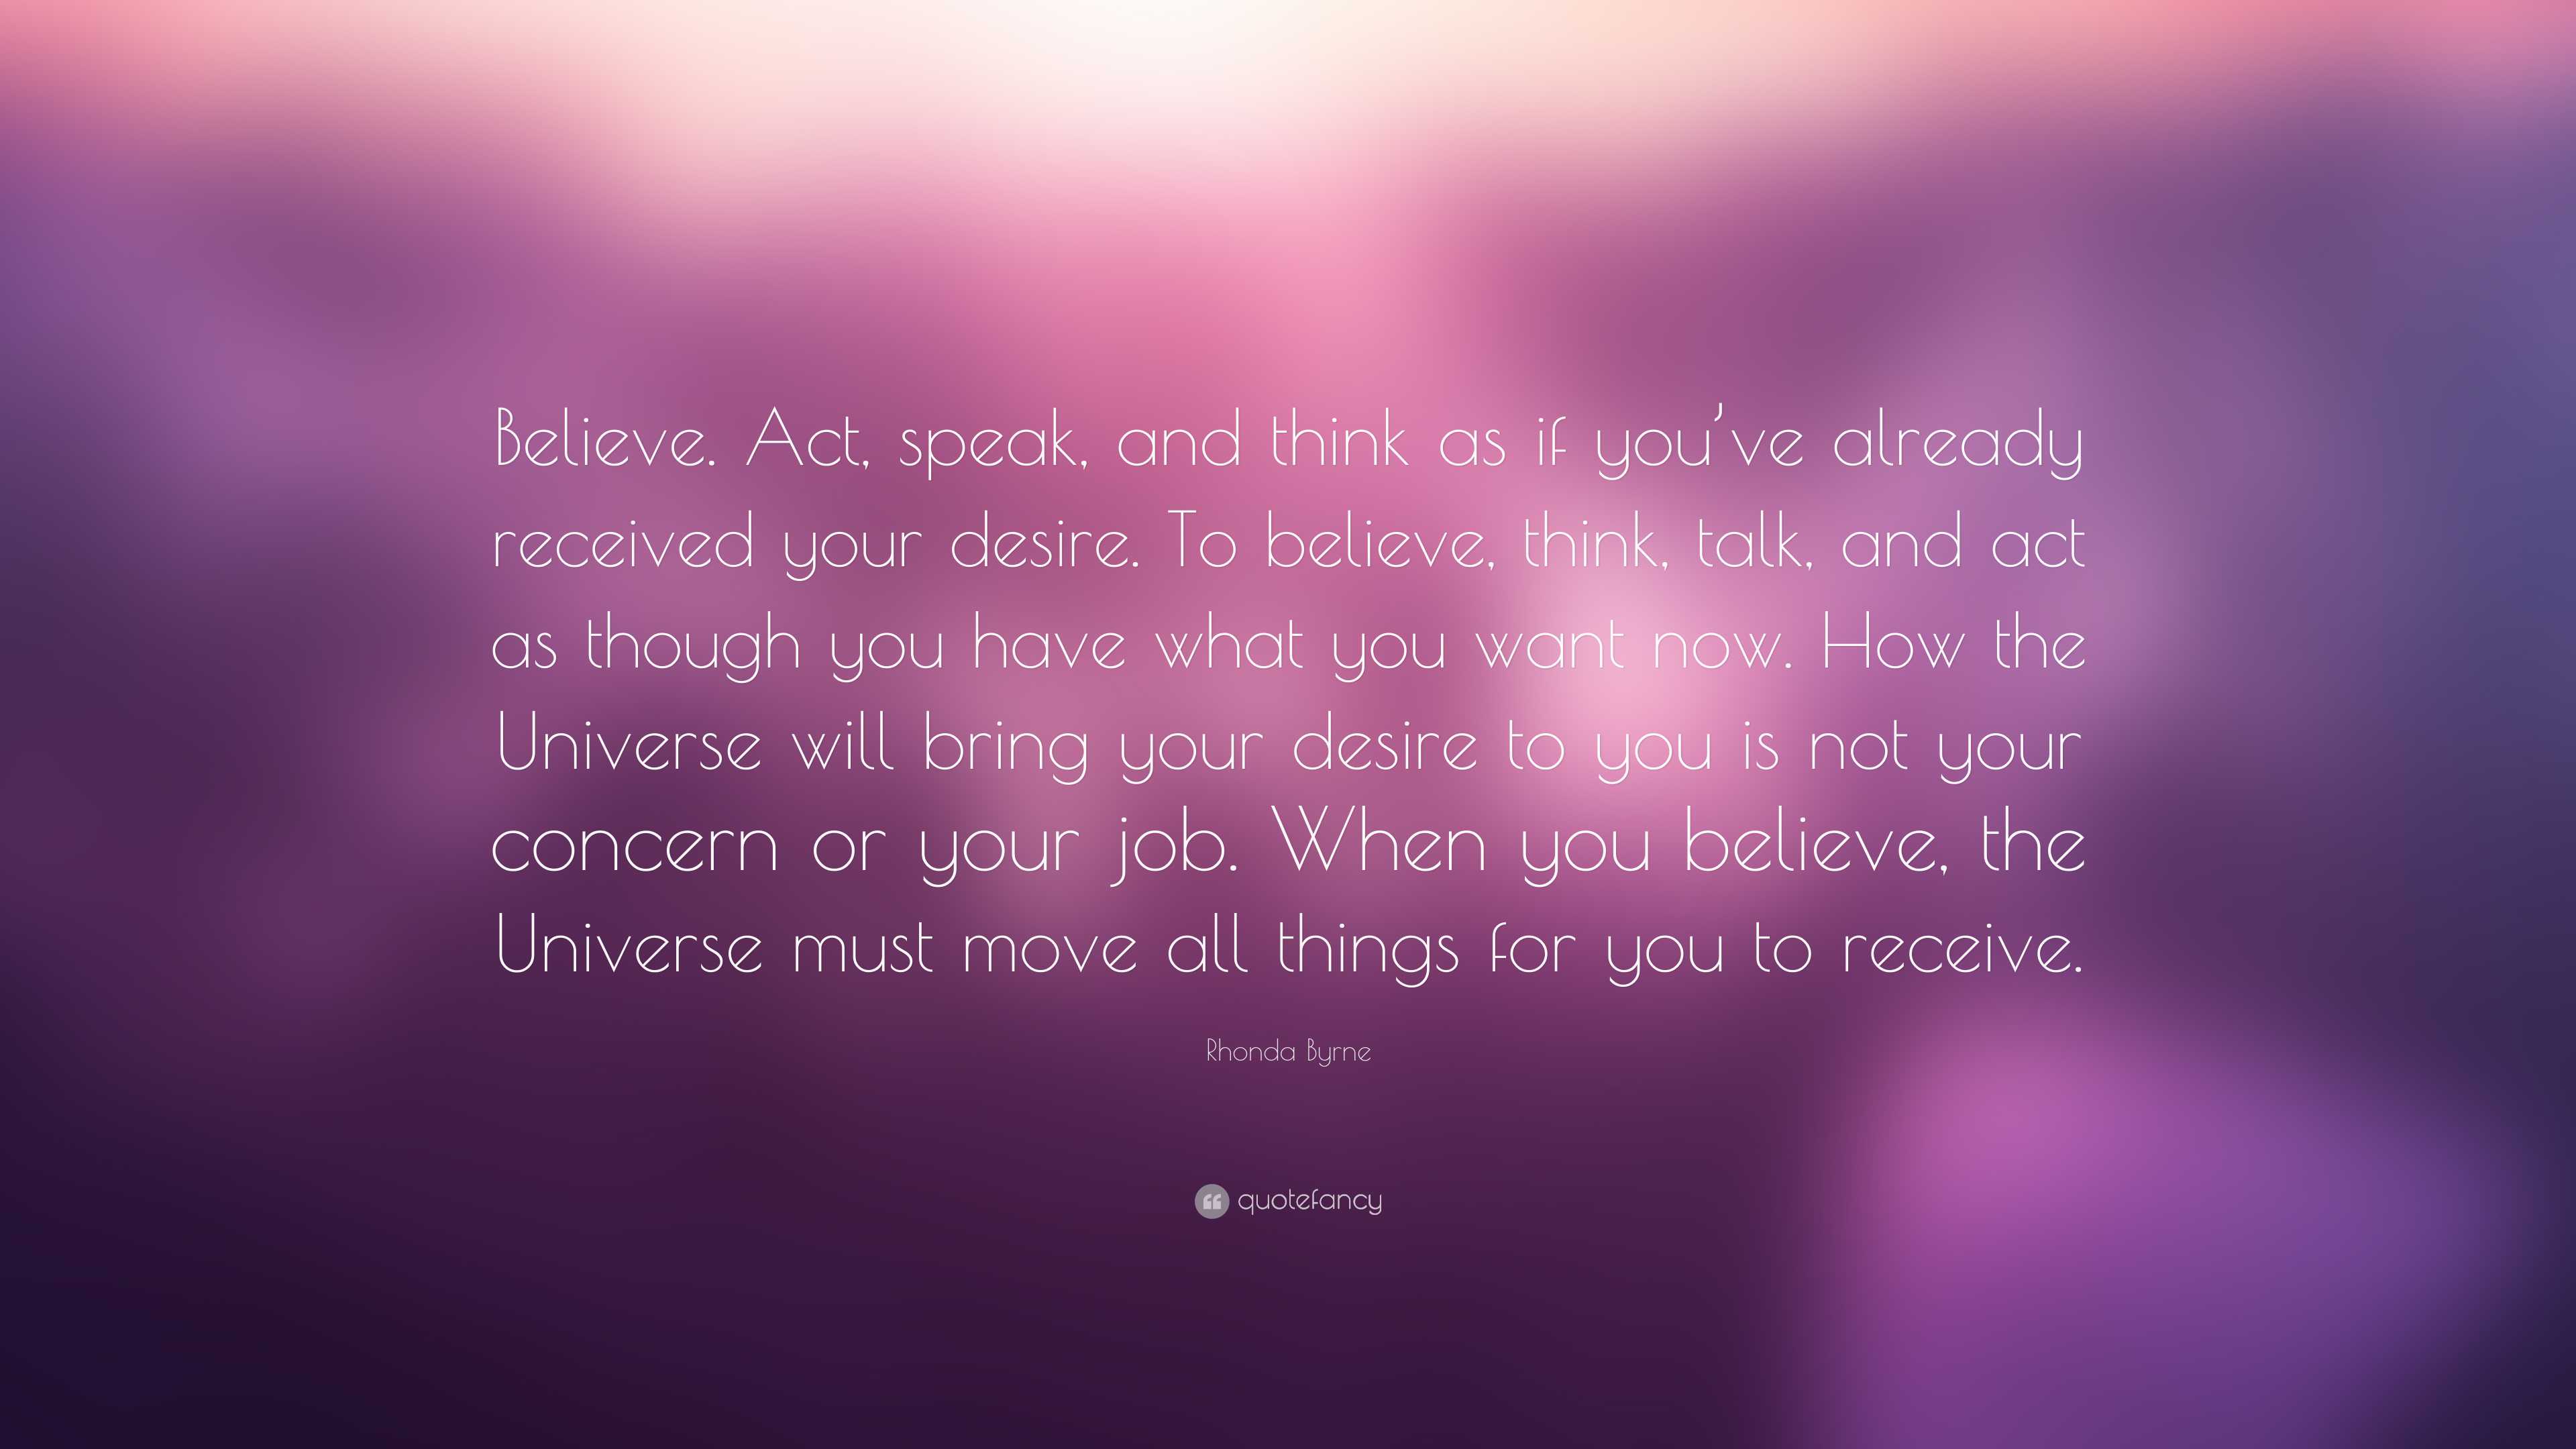 Rhonda Byrne Quote: “Believe. Act, speak, and think as if you’ve ...